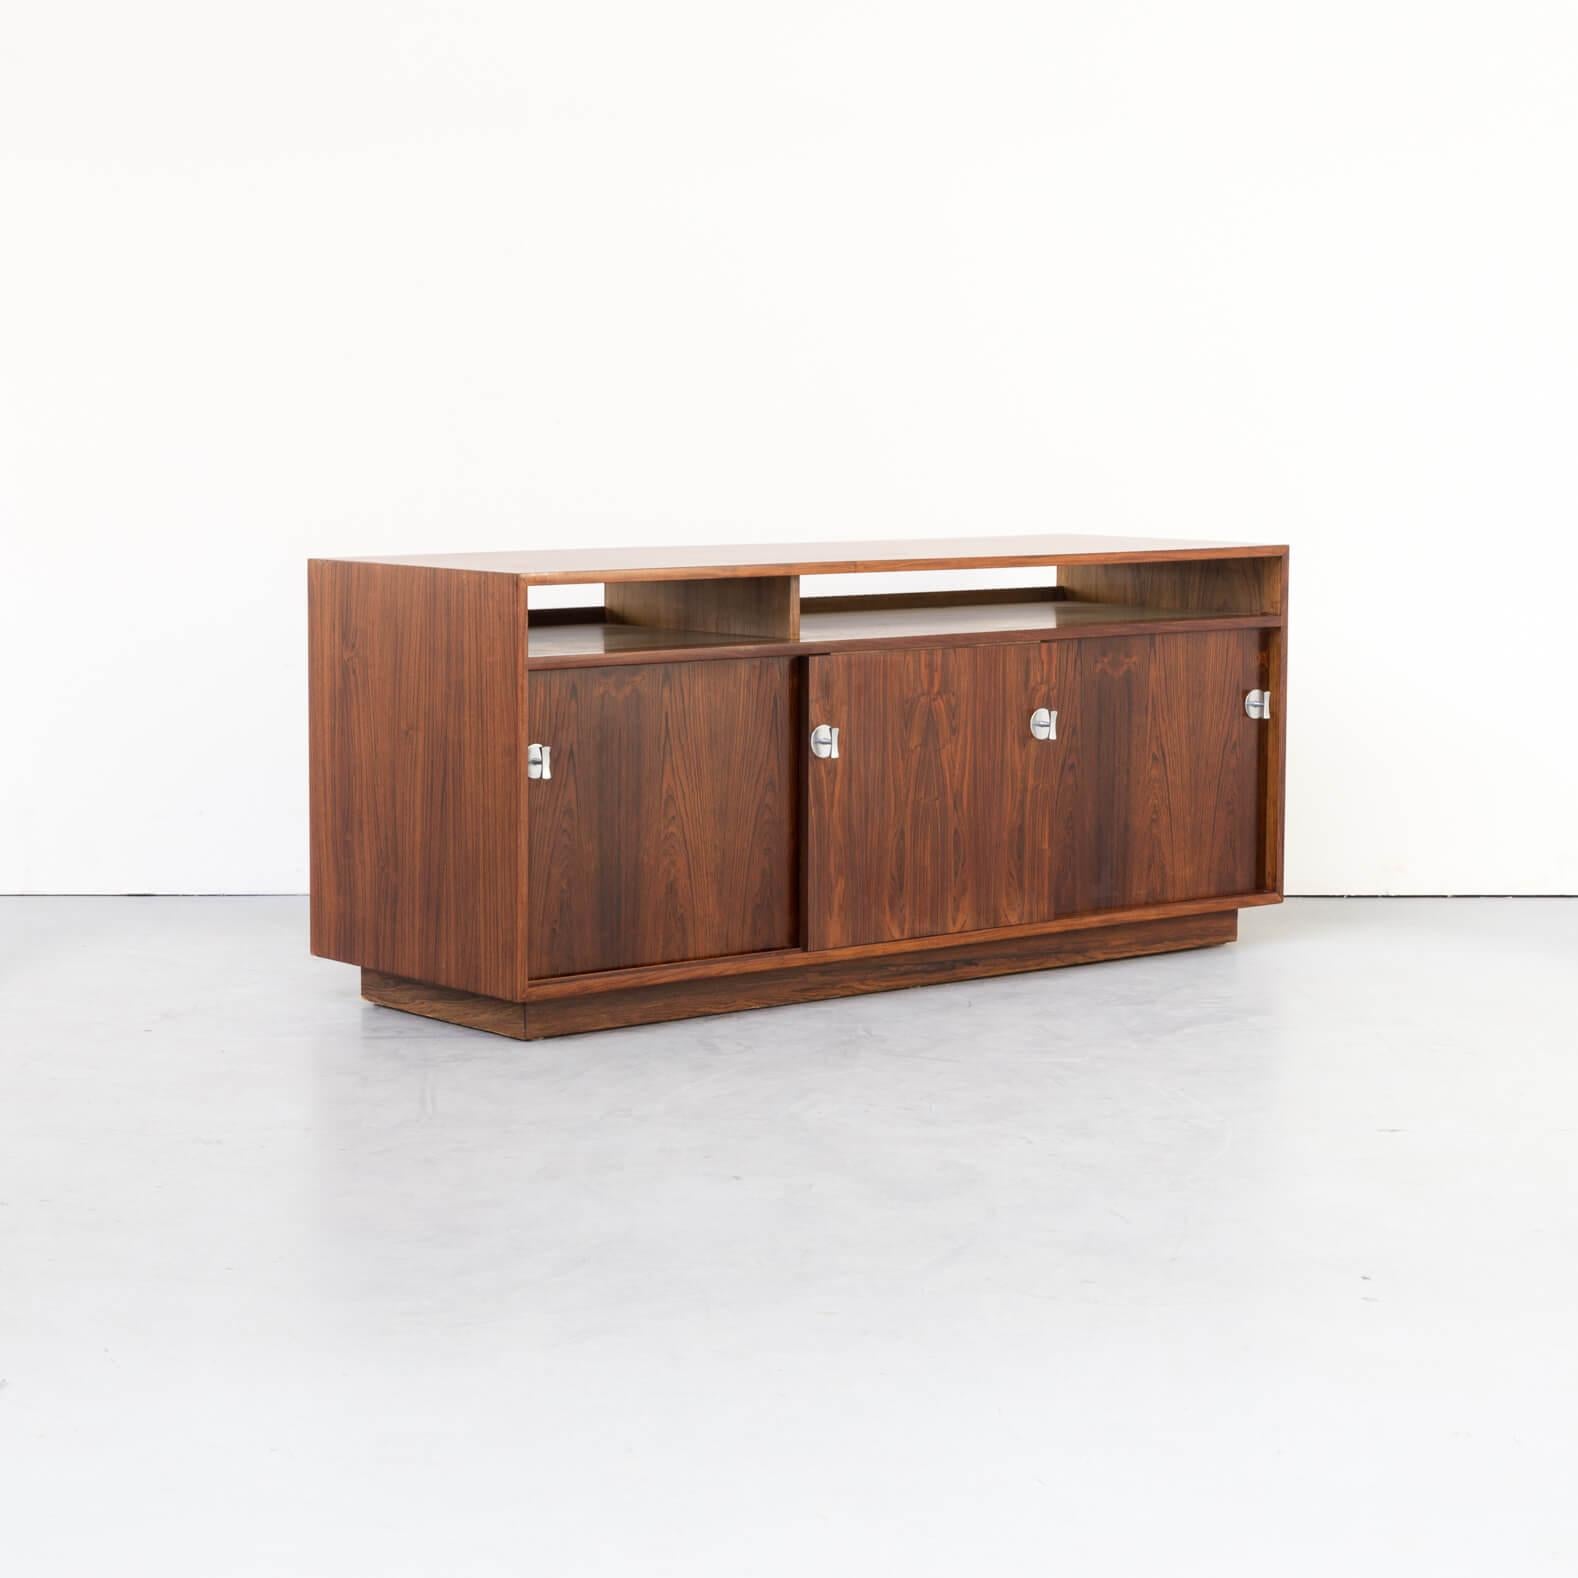 20th Century 1960s Finn Juhl Rosewood Side, Lowboard from the Diplomat Series for Cado For Sale